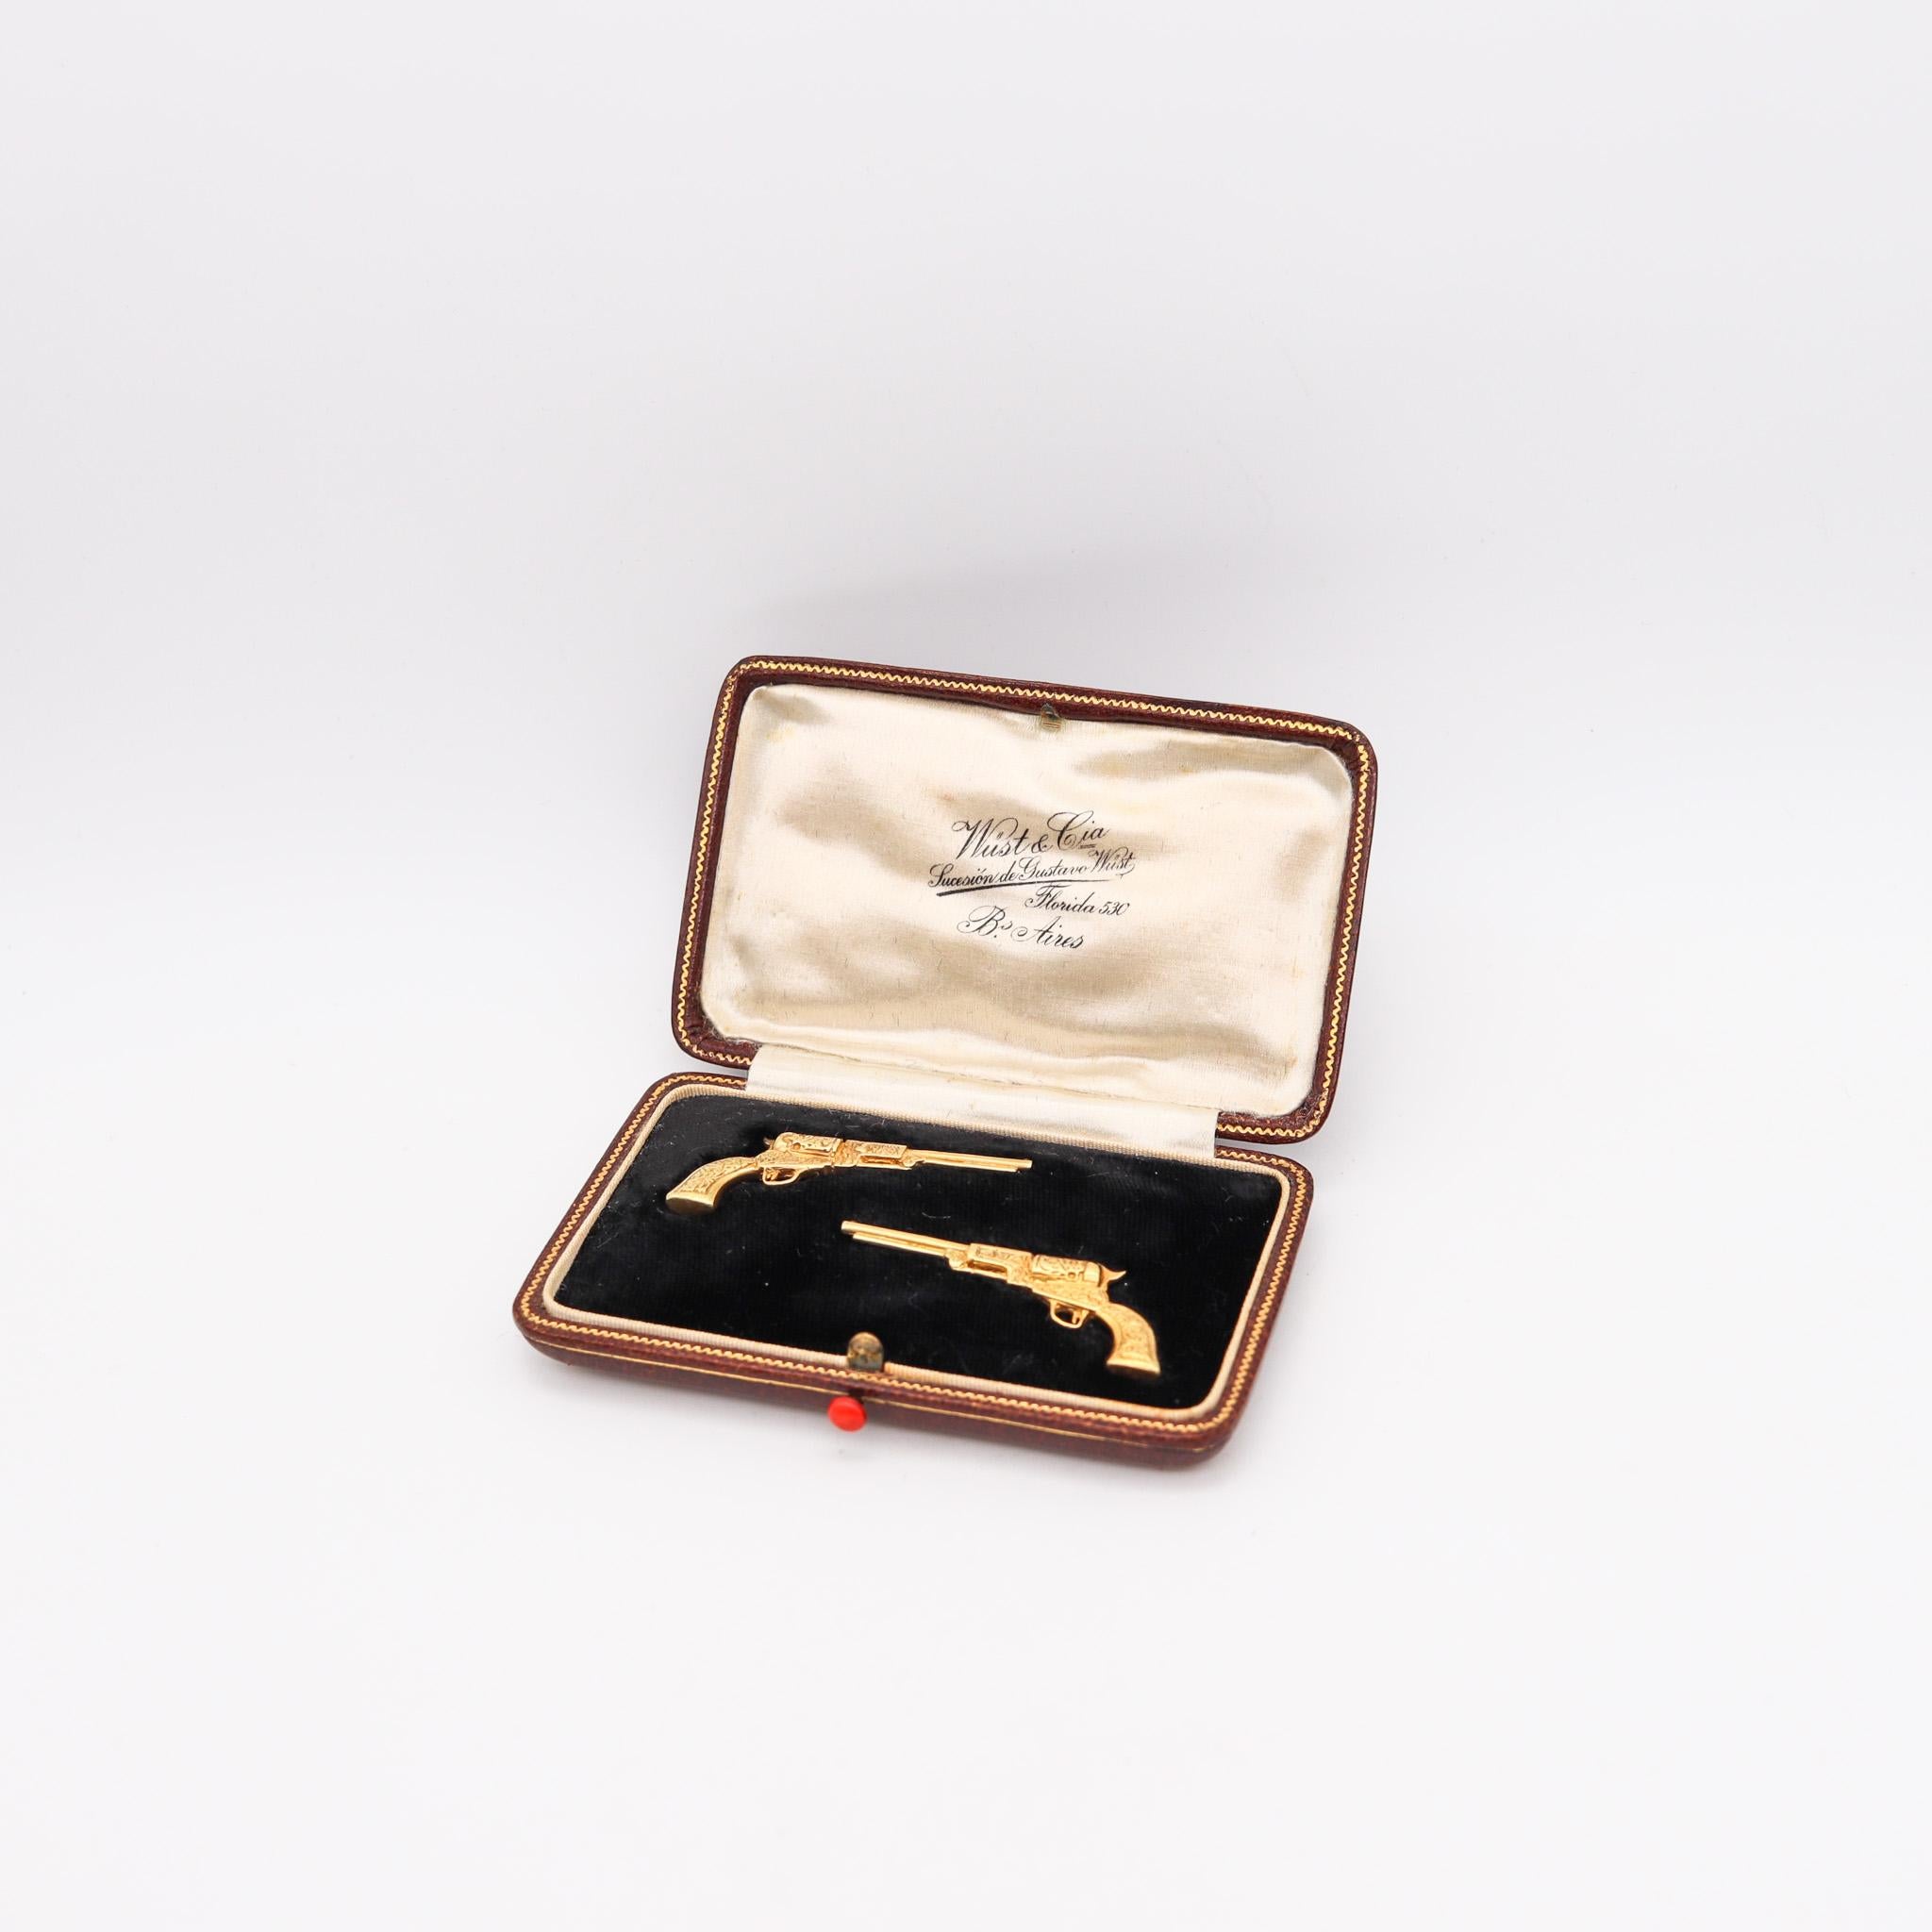 A fabulous pair of cufflinks in fitted box designed by Wust & Co.

Magnificent and very rare pair of cufflinks, created during the early art deco period, back in the 1915-20. This pair has been made in the shapes of stylized miniatures colt pistols,